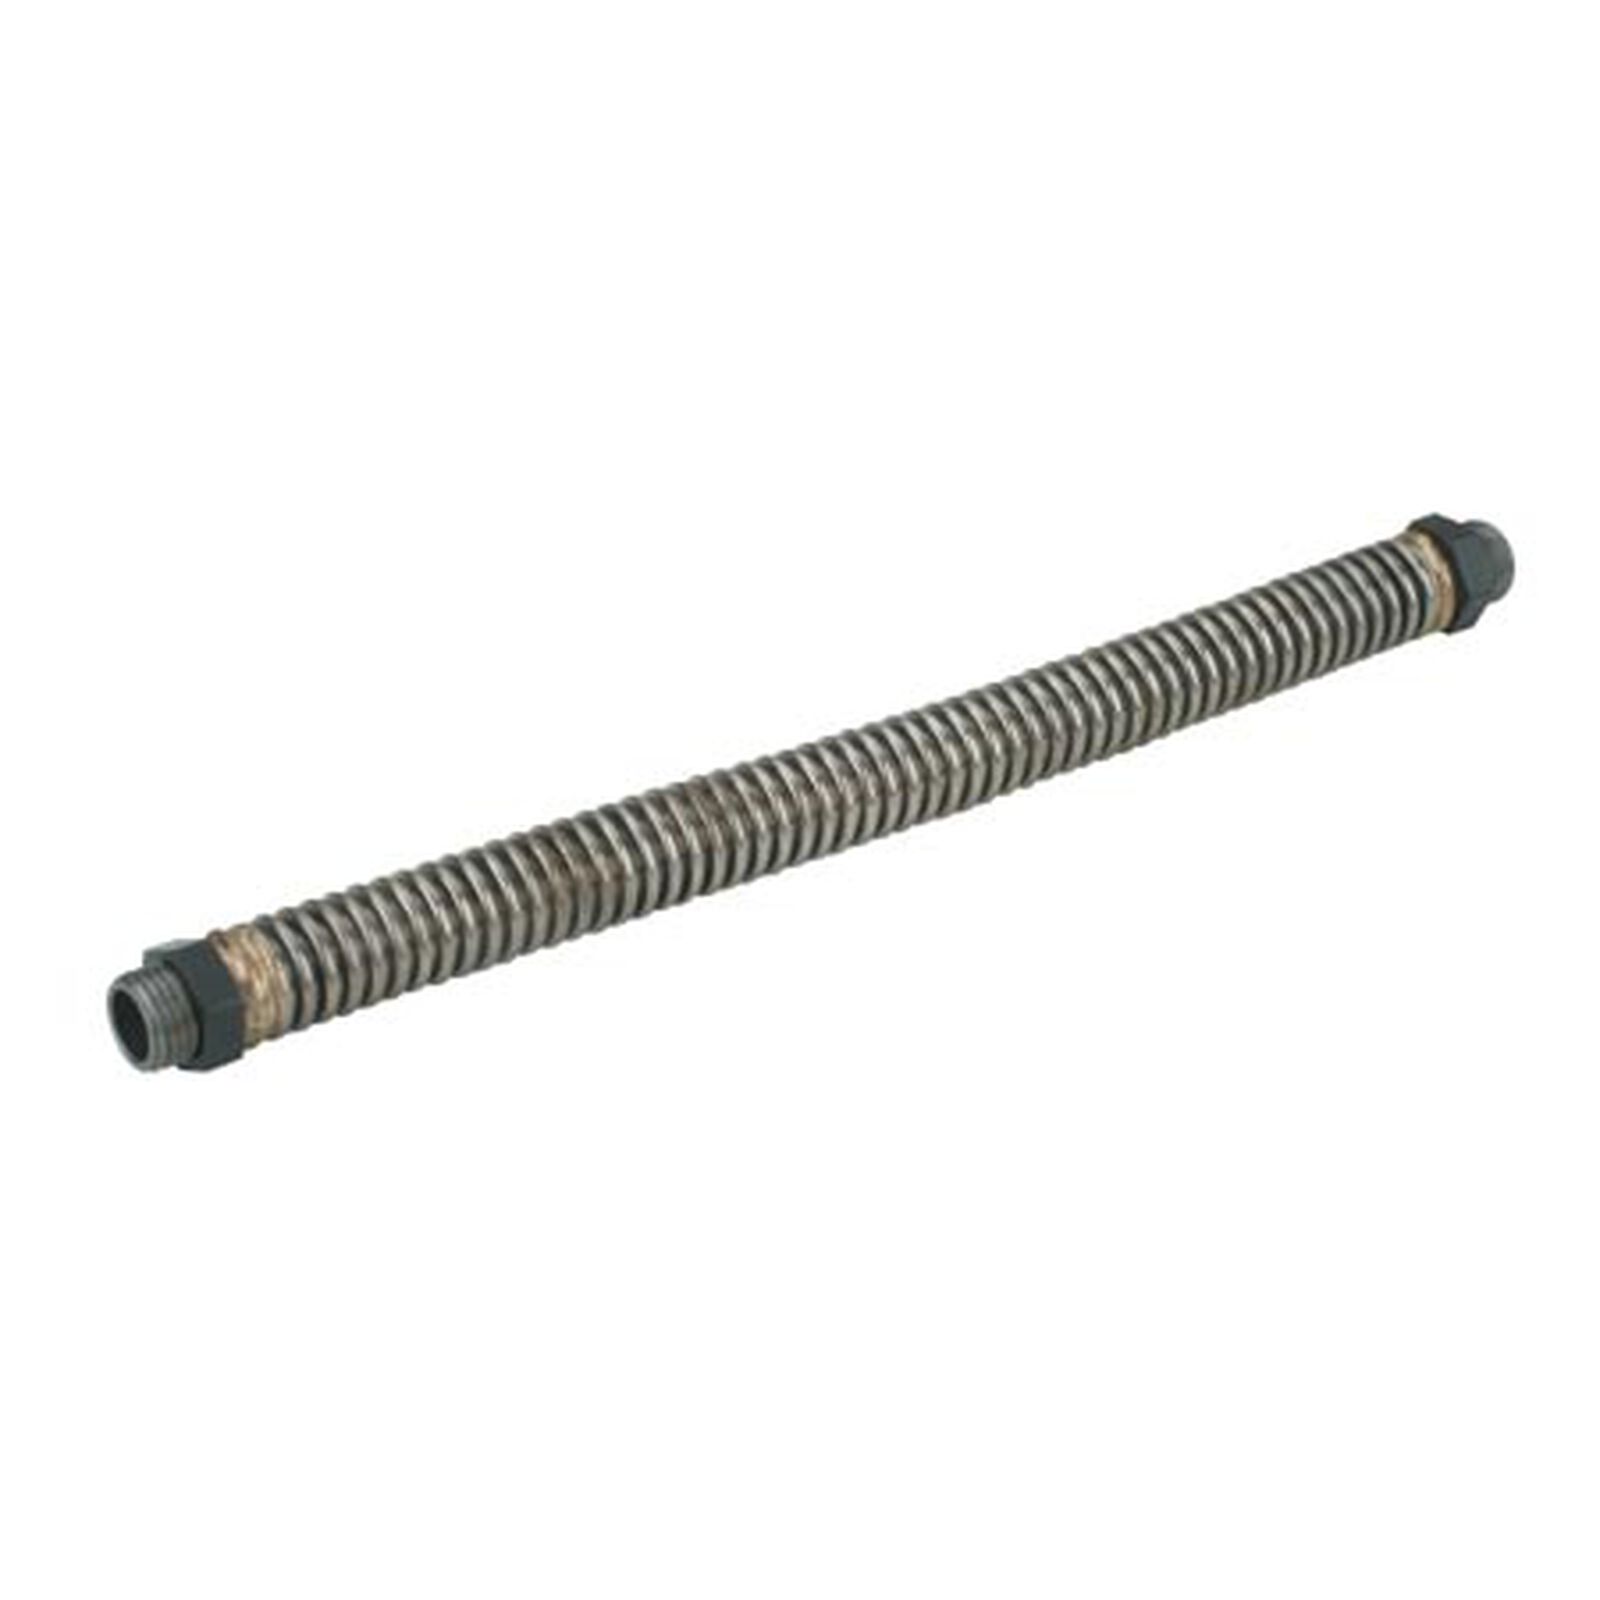 Flex Extension Pipe with Two Nuts, 6.375": 50-56